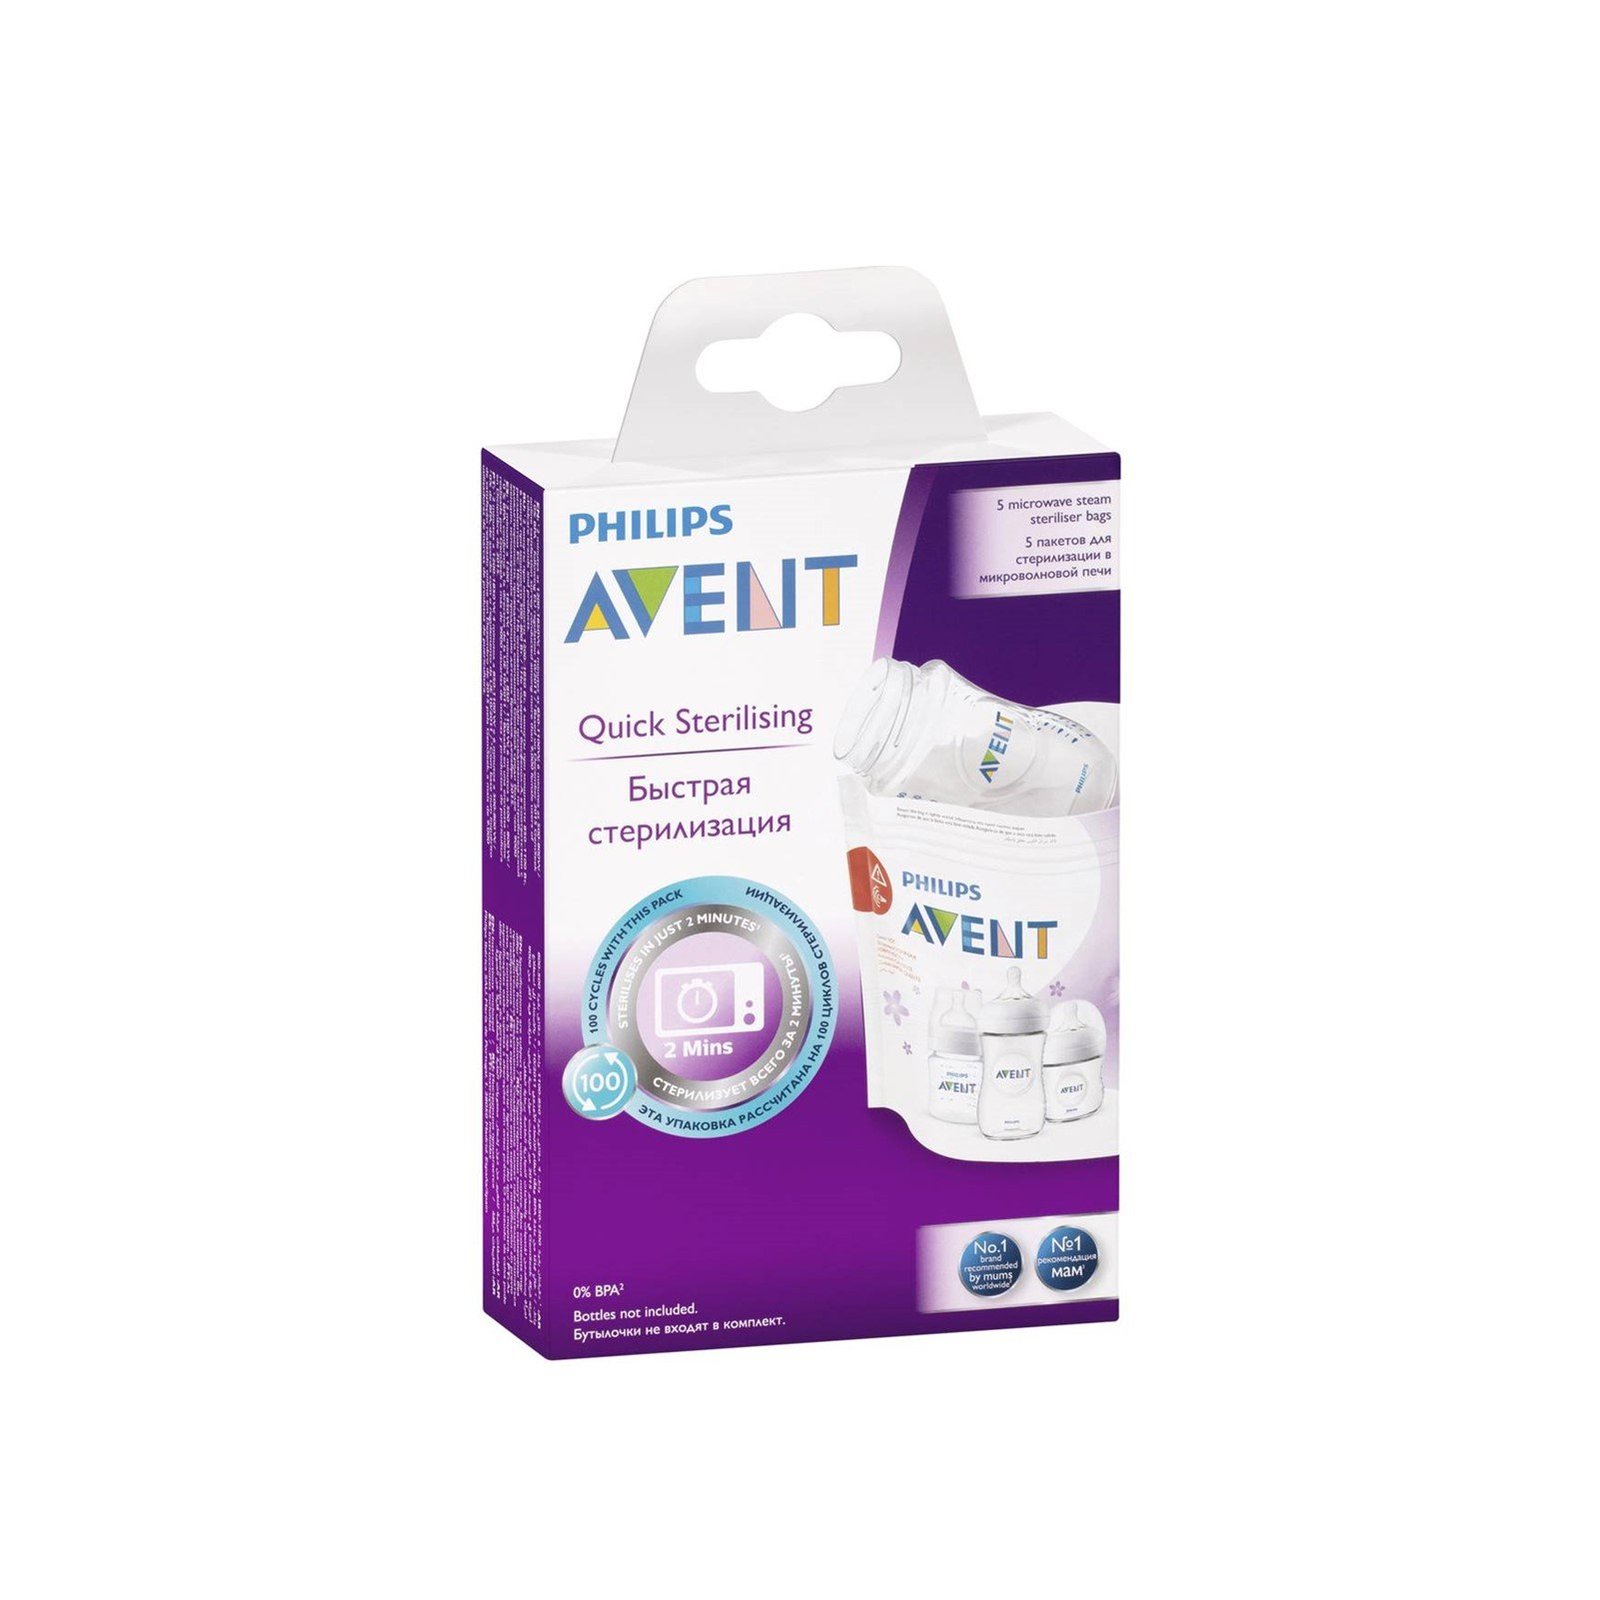 https://static.beautytocare.com/cdn-cgi/image/width=1600,height=1600,f=auto/media/catalog/product//p/h/philips-avent-microwave-steam-sterilizer-bags-x5.jpg